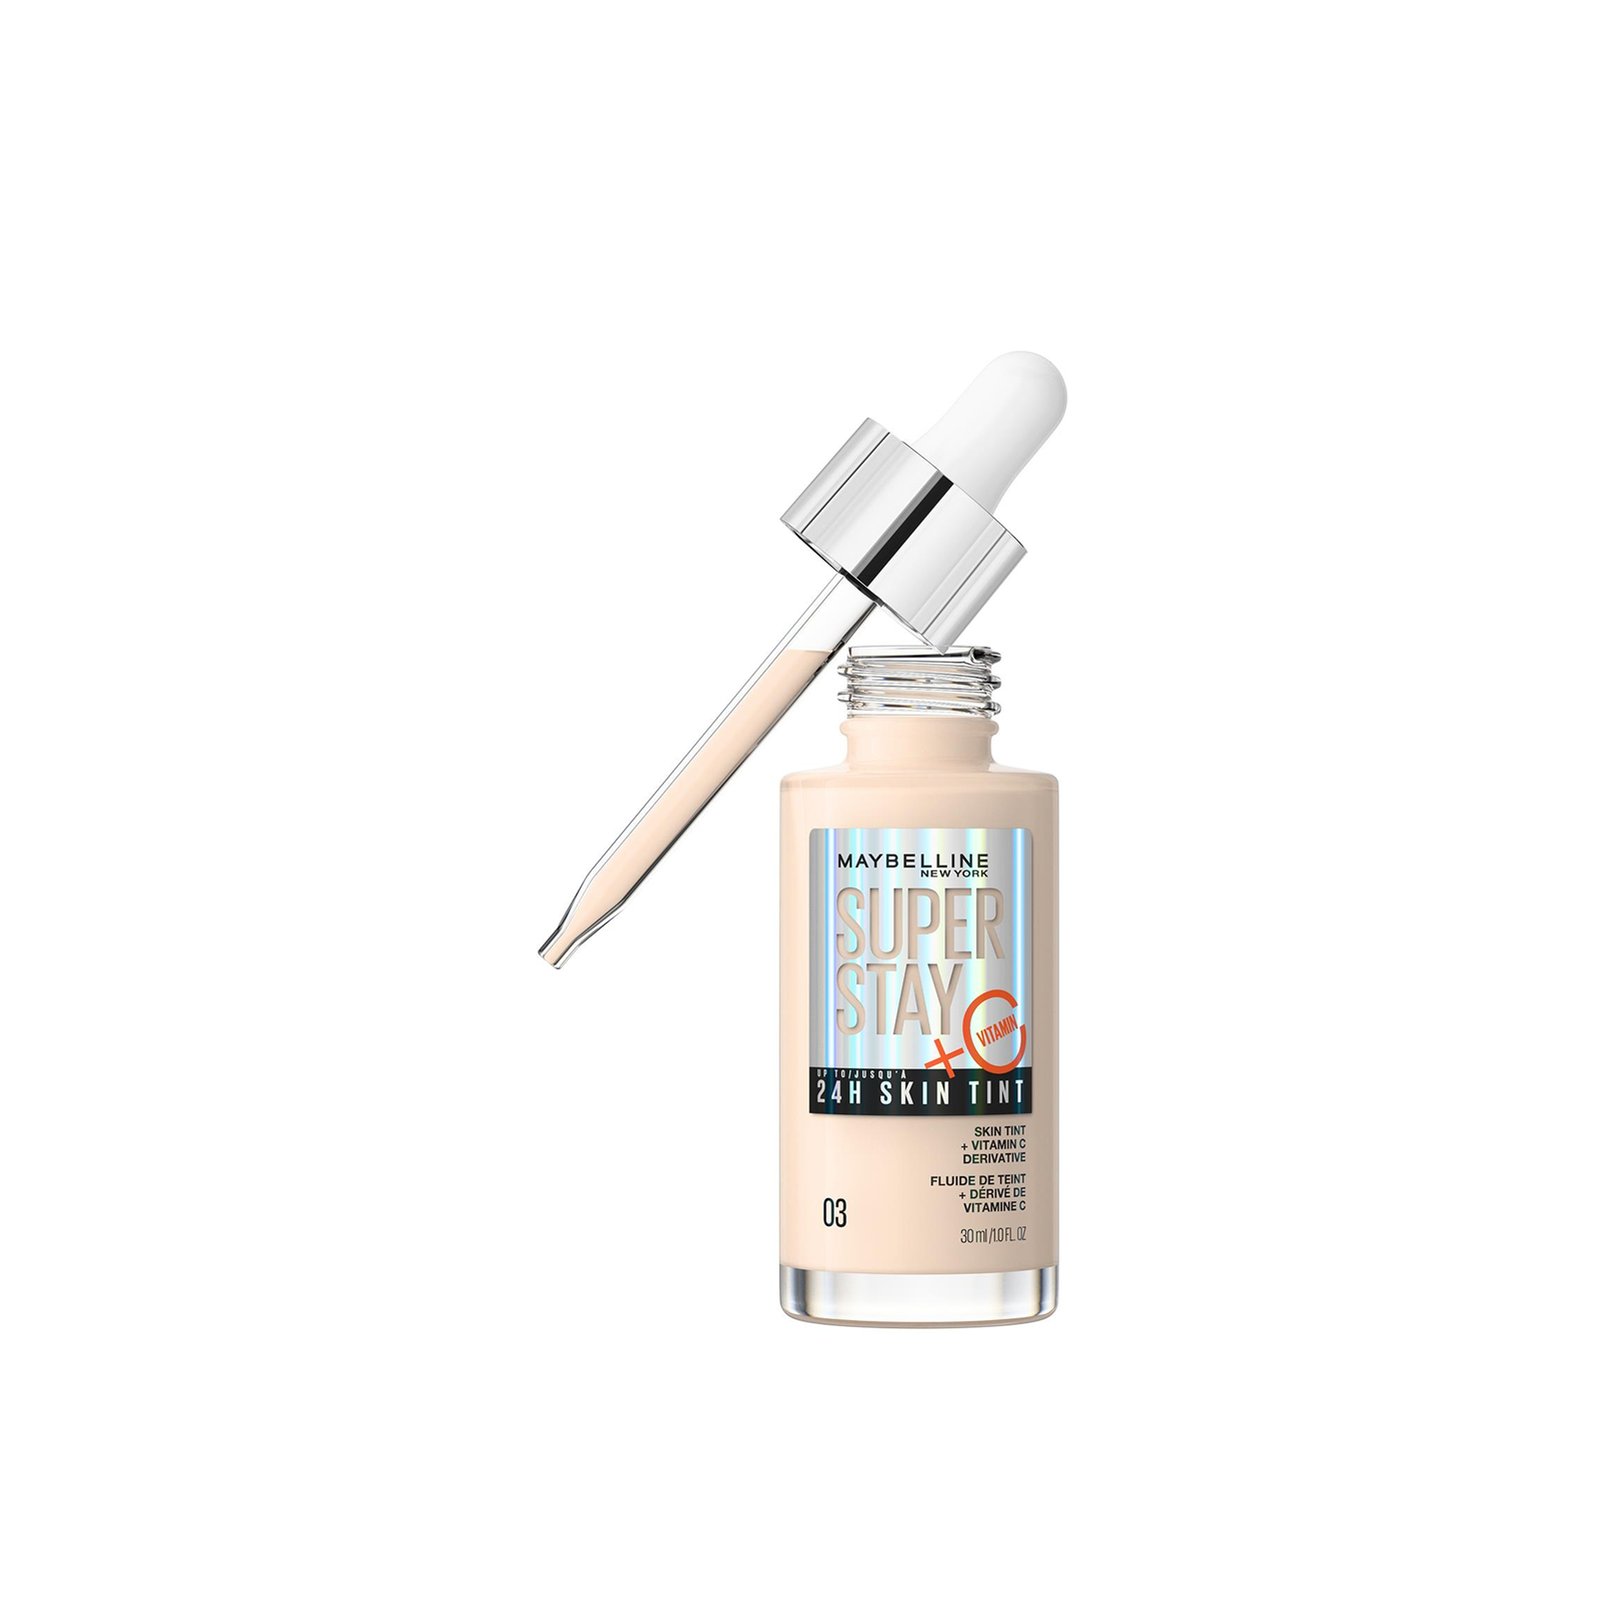 https://static.beautytocare.com/cdn-cgi/image/width=1600,height=1600,f=auto/media/catalog/product//m/a/maybelline-super-stay-24h-skin-tint-foundation-03-30ml.png